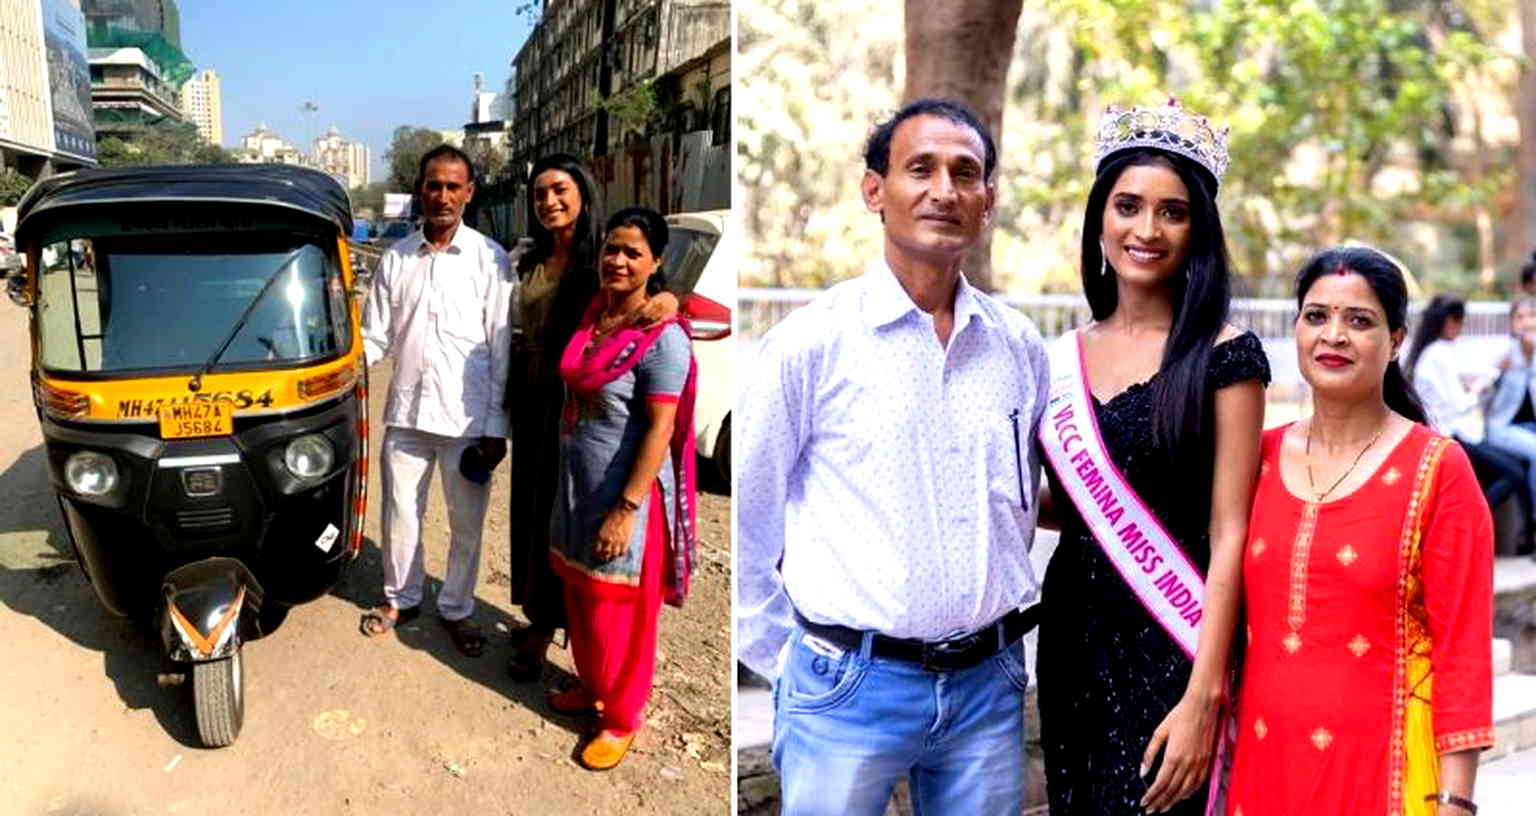 Rickshaw Driver’s Daughter Who Mopped Floors to Afford School Named Miss India 2020 Runner-Up